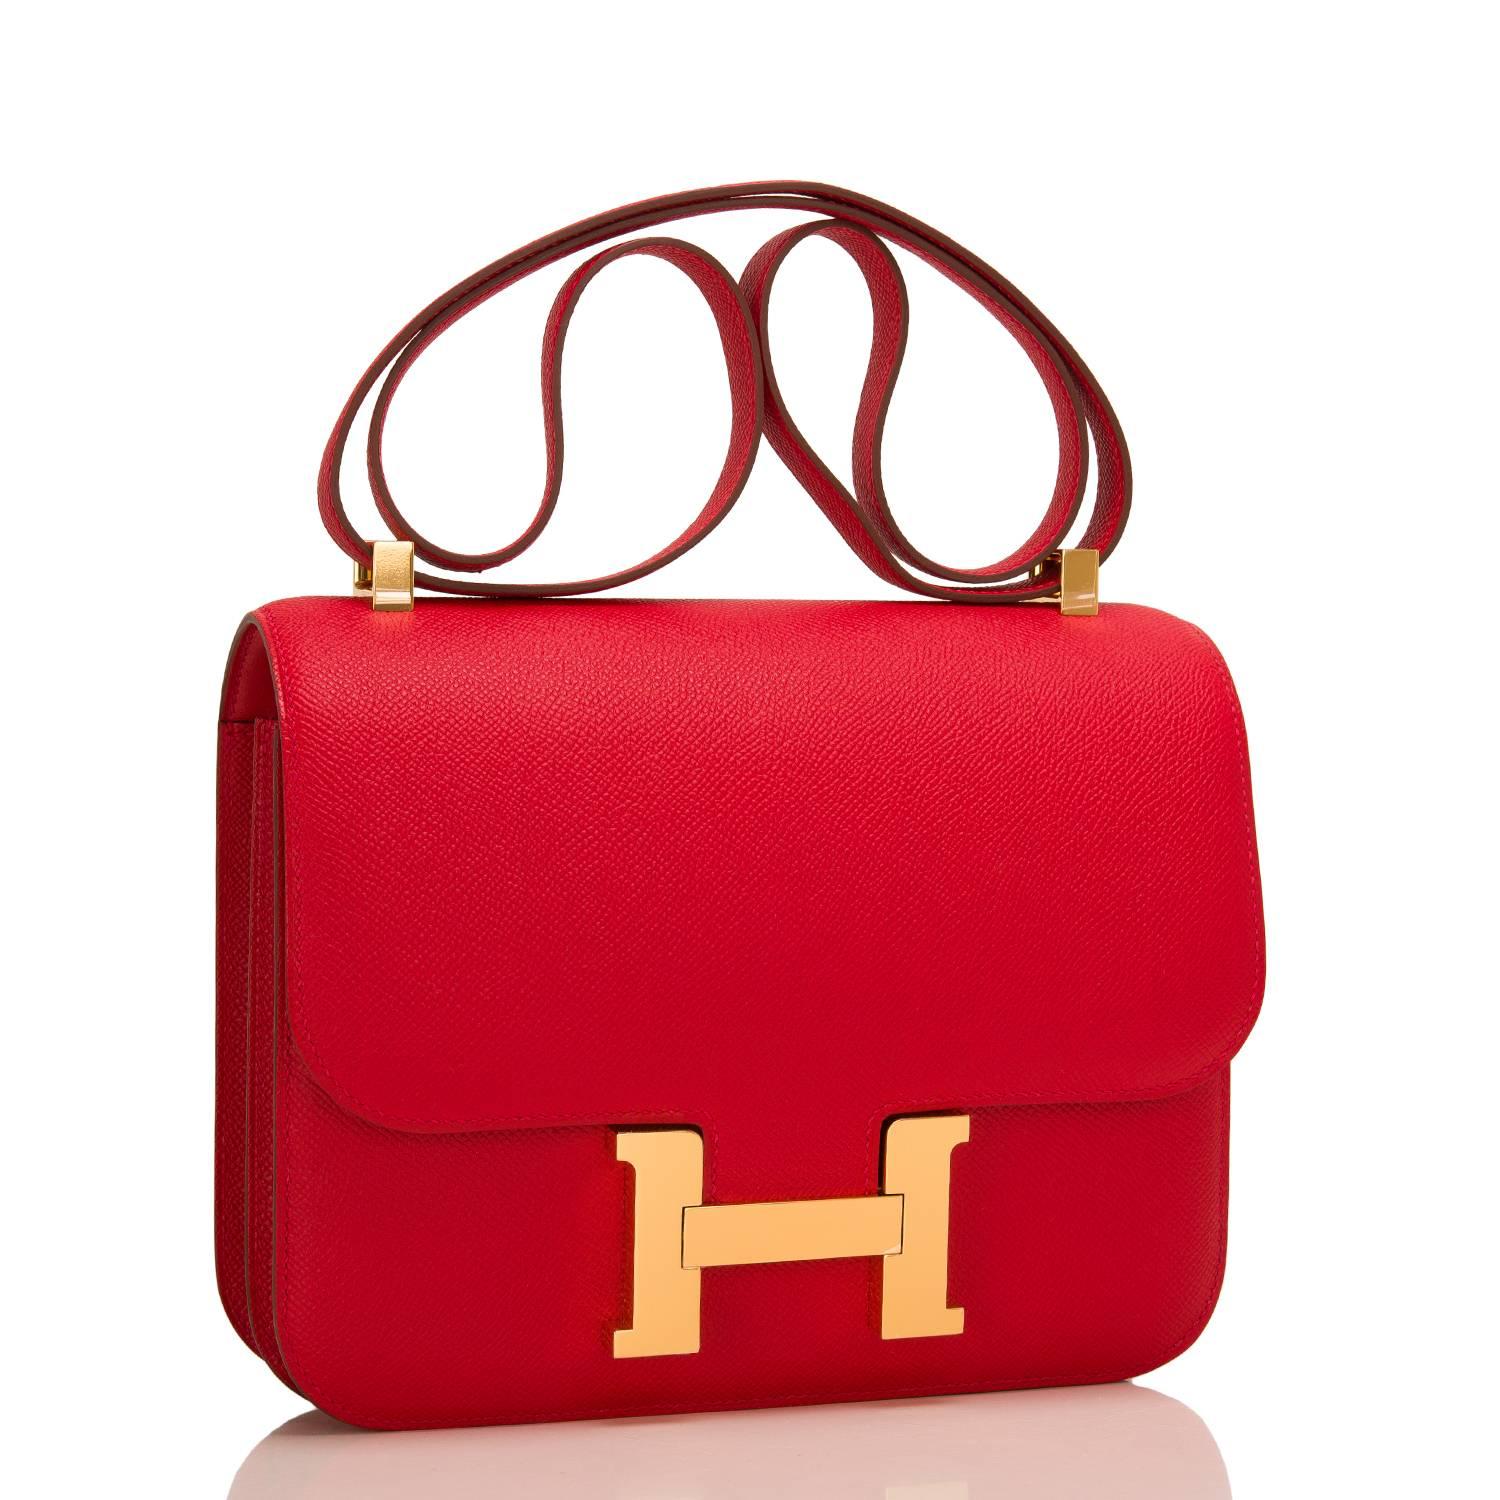 Hermes Rouge Casaque Constance 24cm of epsom leather with gold hardware.

This Constance features tonal stitching, palladium hardware, a metal 